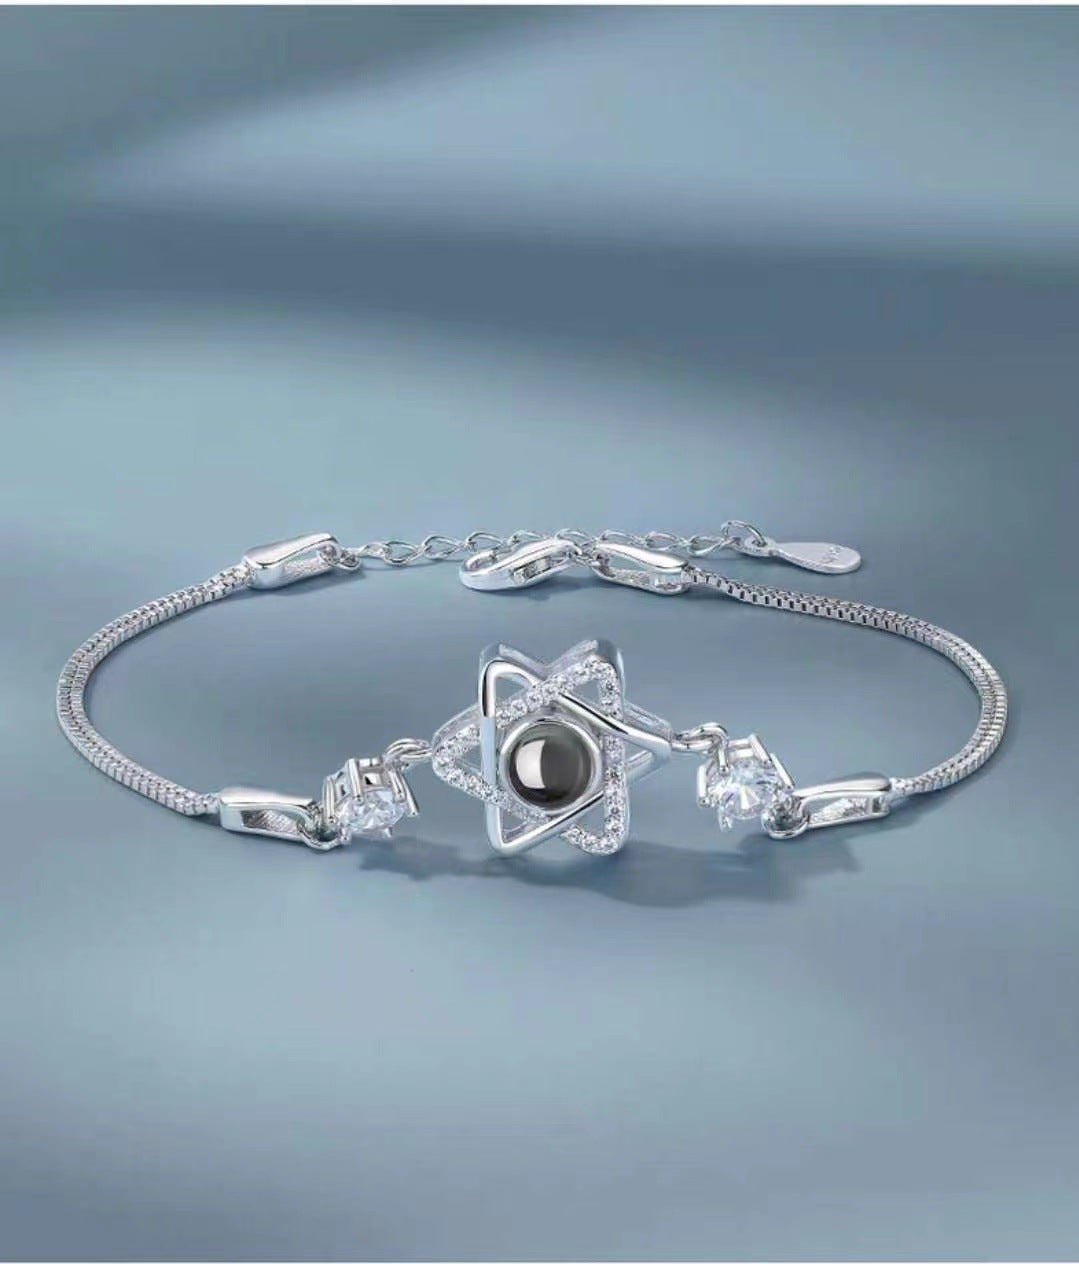 Exquisite and dazzling six-pointed star diamond projection bracelet